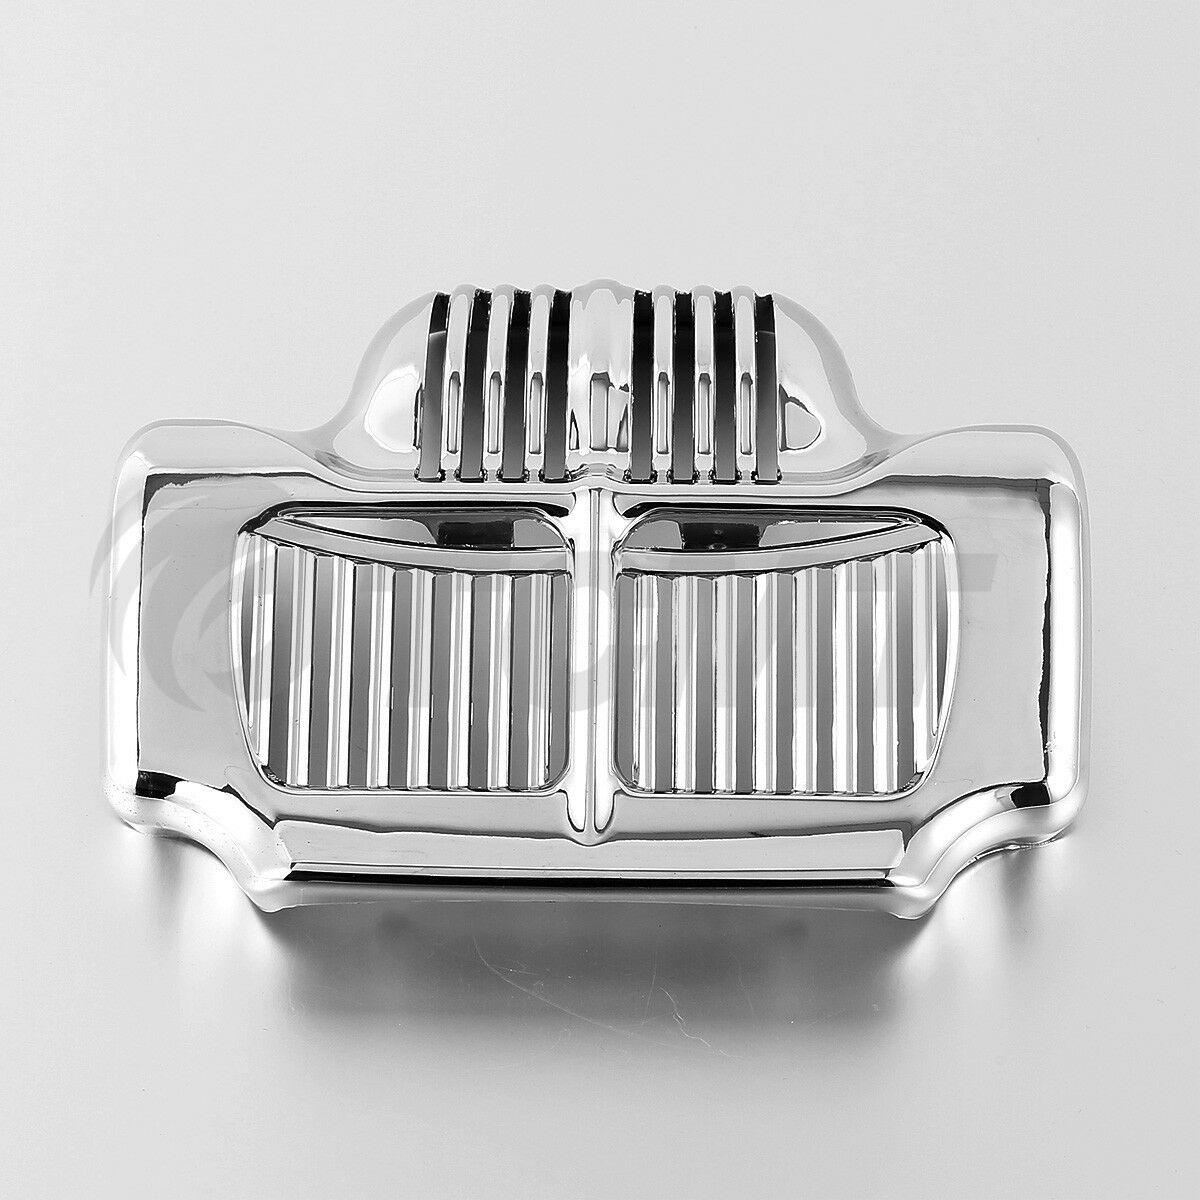 Chrome ABS Oil Cooler Cover For Harley Street Electra Glide Road King 2011-2016 - Moto Life Products